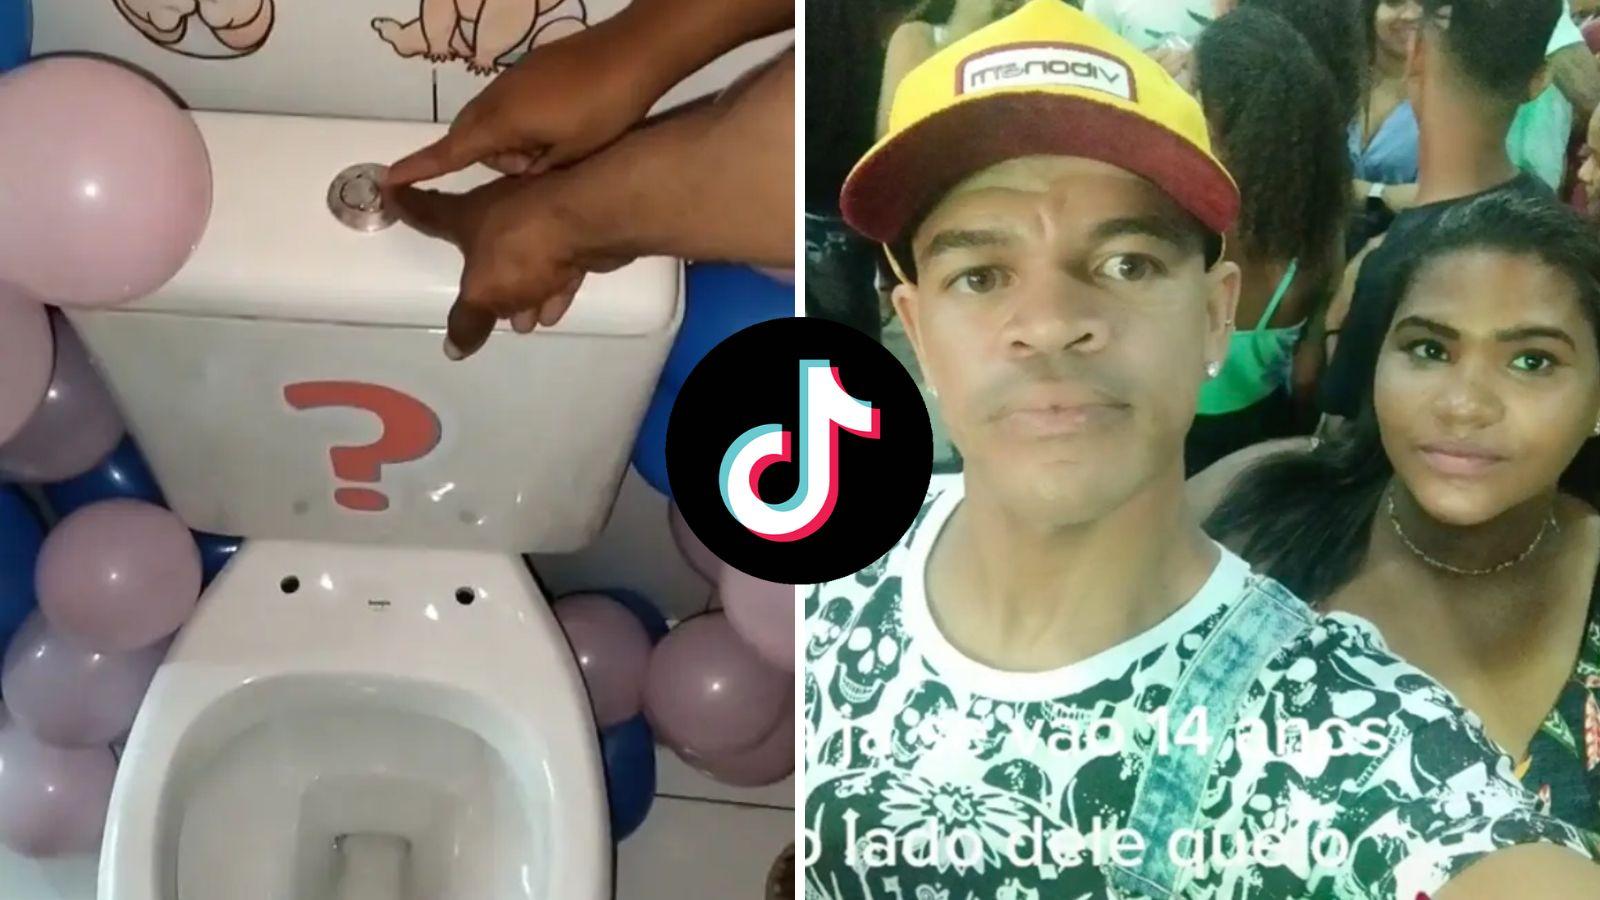 Couple go viral after using a toilet for their gender reveal